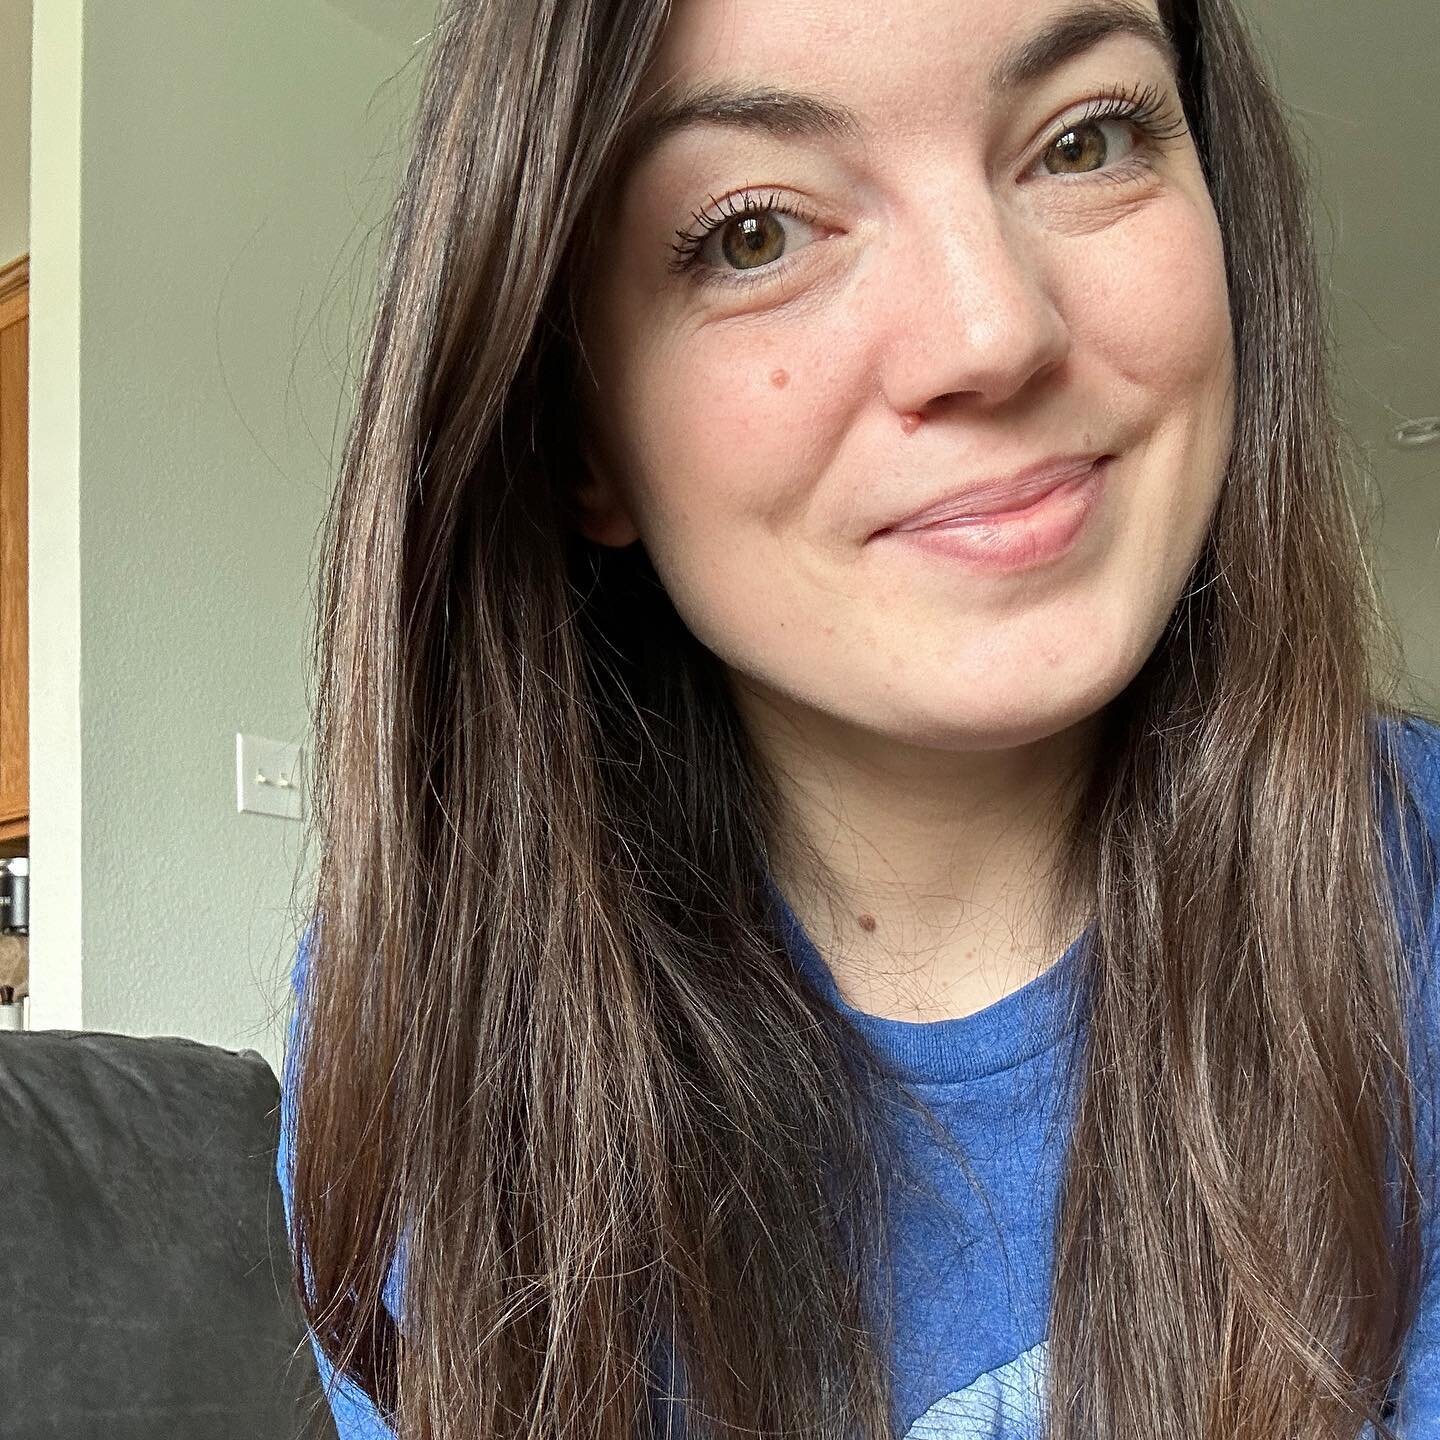 Hi! I&rsquo;m Brittany. I&rsquo;m glad you&rsquo;re here. 

In this space I write a lot about navigating dark days (for me that came in the form of self-injury), the shame that convinced me I was alone, and the truth I learned that changed everything